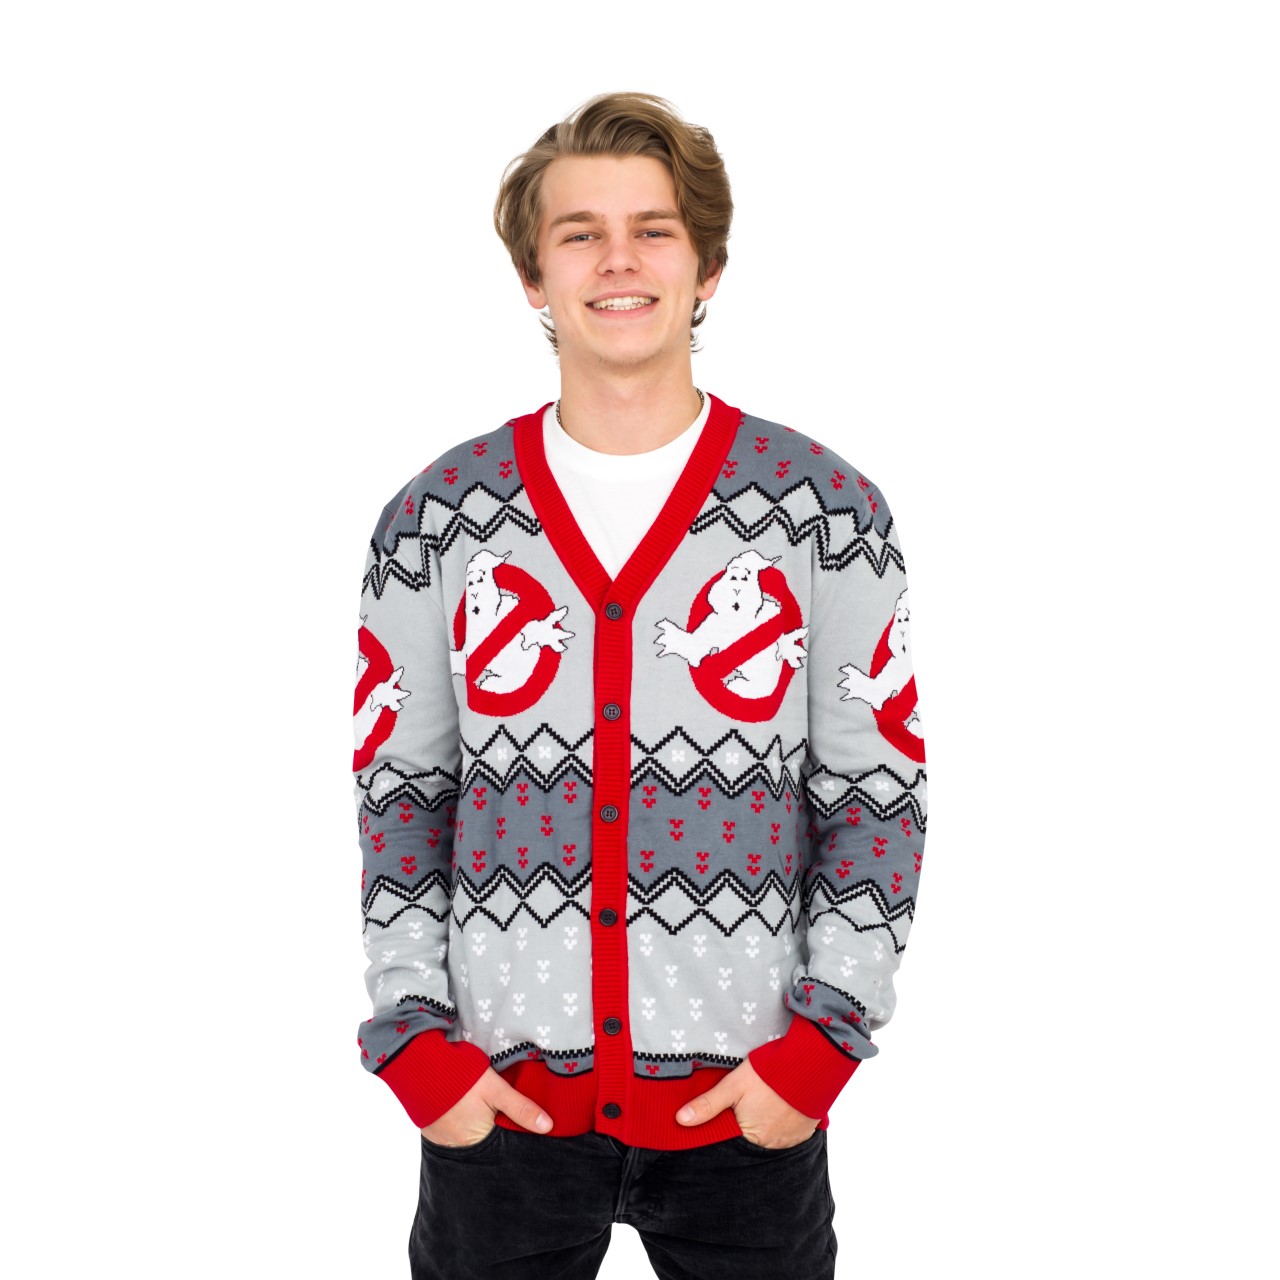 Ghostbusters Logo Ugly Christmas Cardigan Sweater,Specials : uglyschristmassweater.com